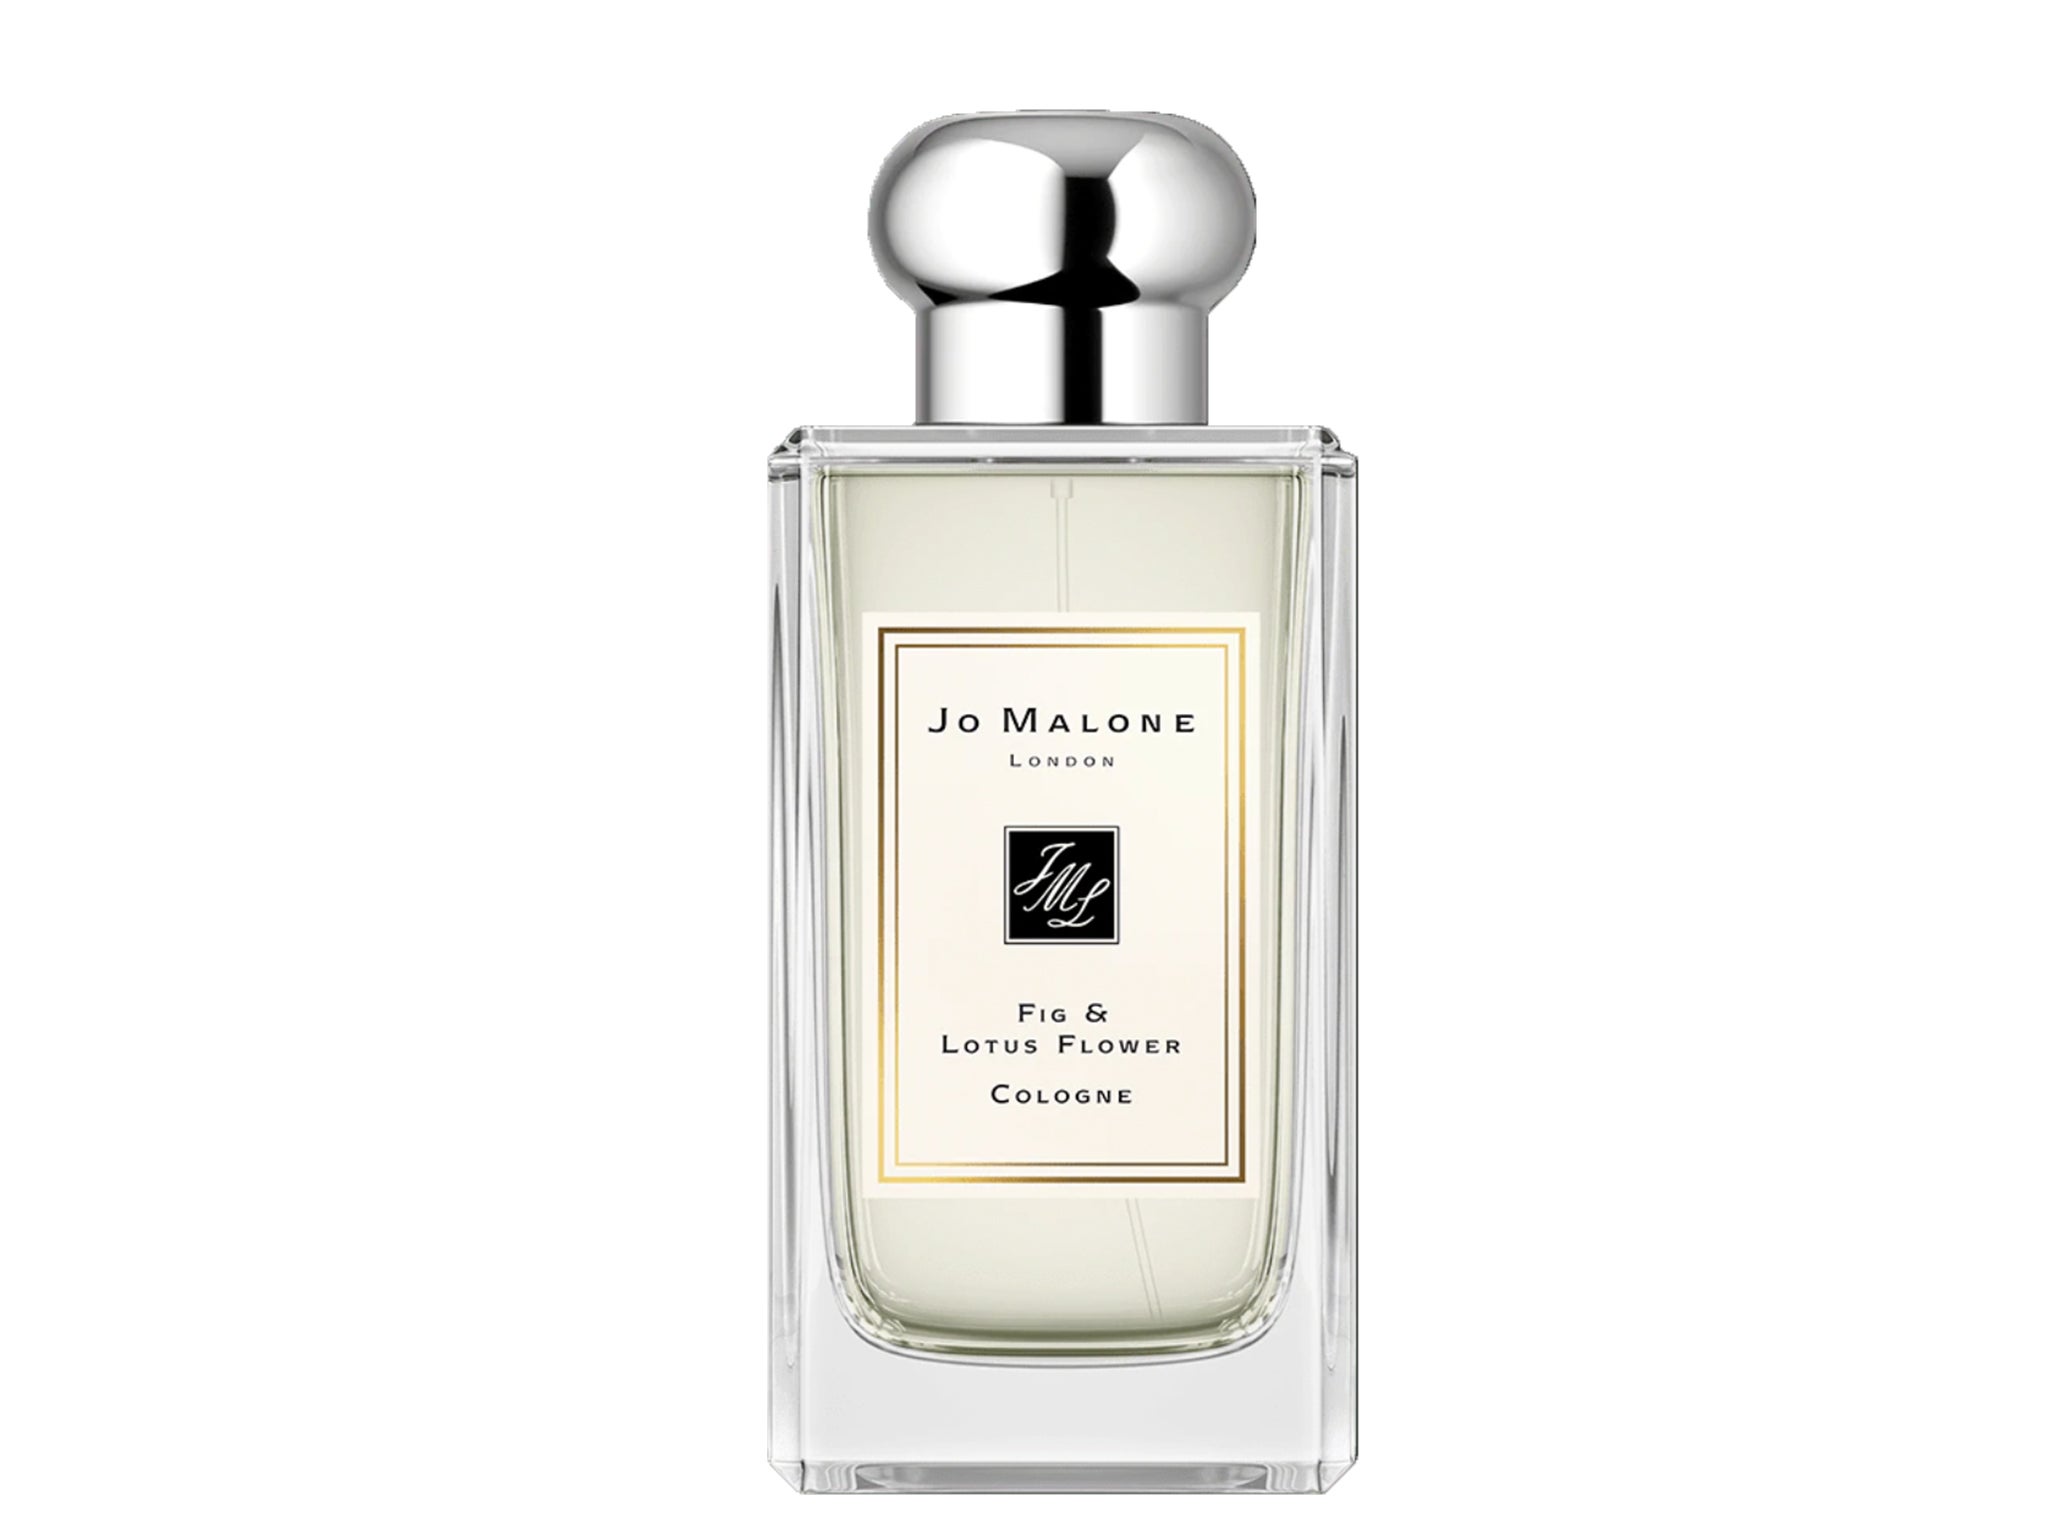 The latest launch from Jo Malone London is a fresh, fig-based fragrance